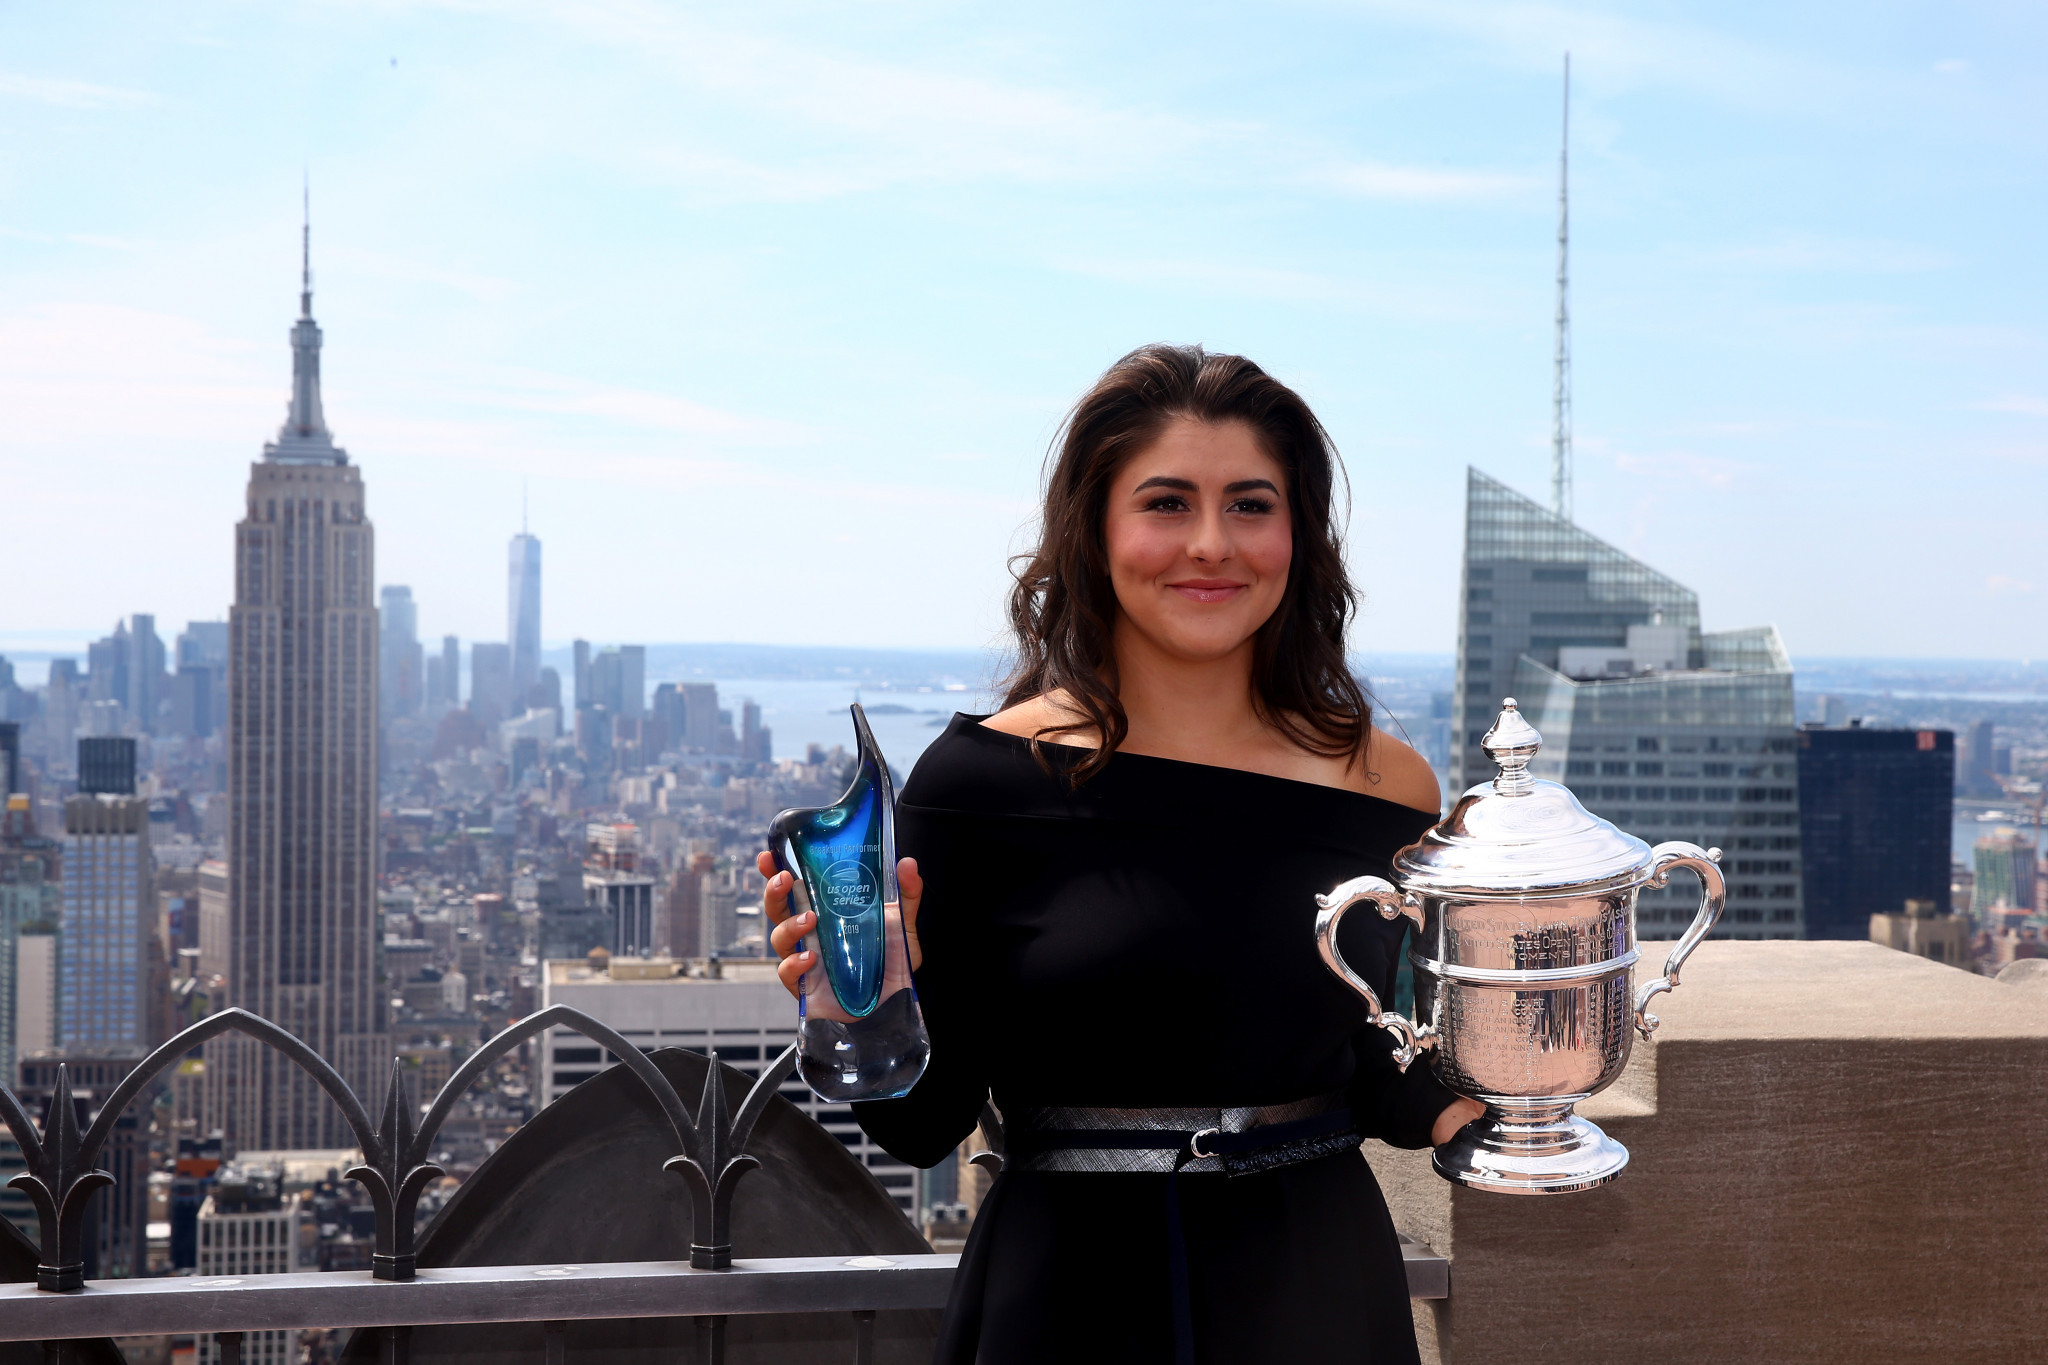 Reigning women's US Open champion Bianca Andreescu will not defend her title ©Getty Images